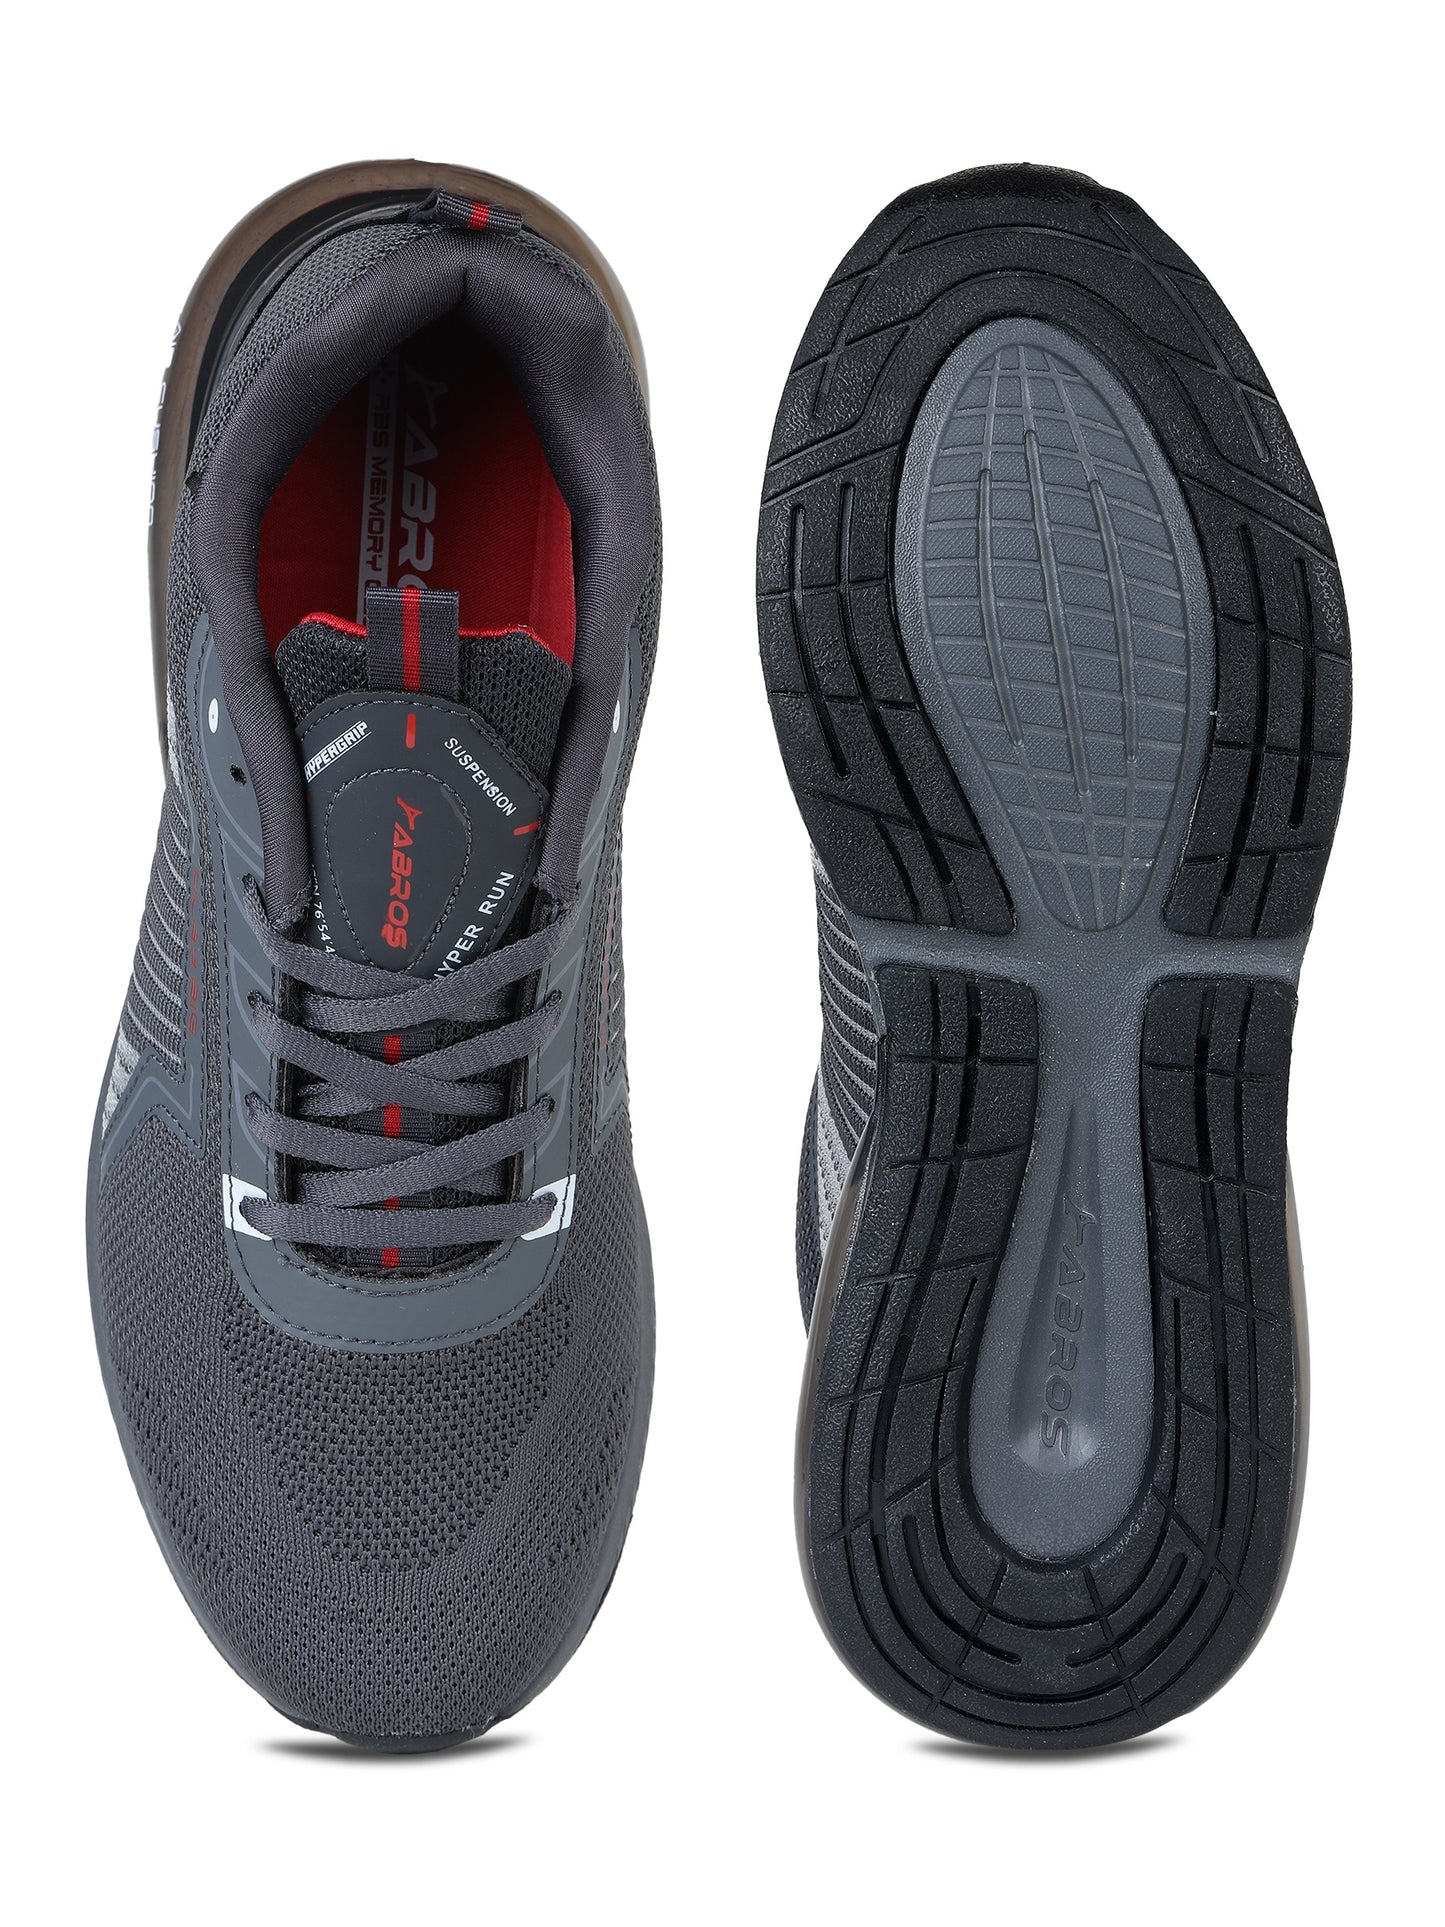 ABROS  THOR RUNNING SPORTS SHOES FOR MEN